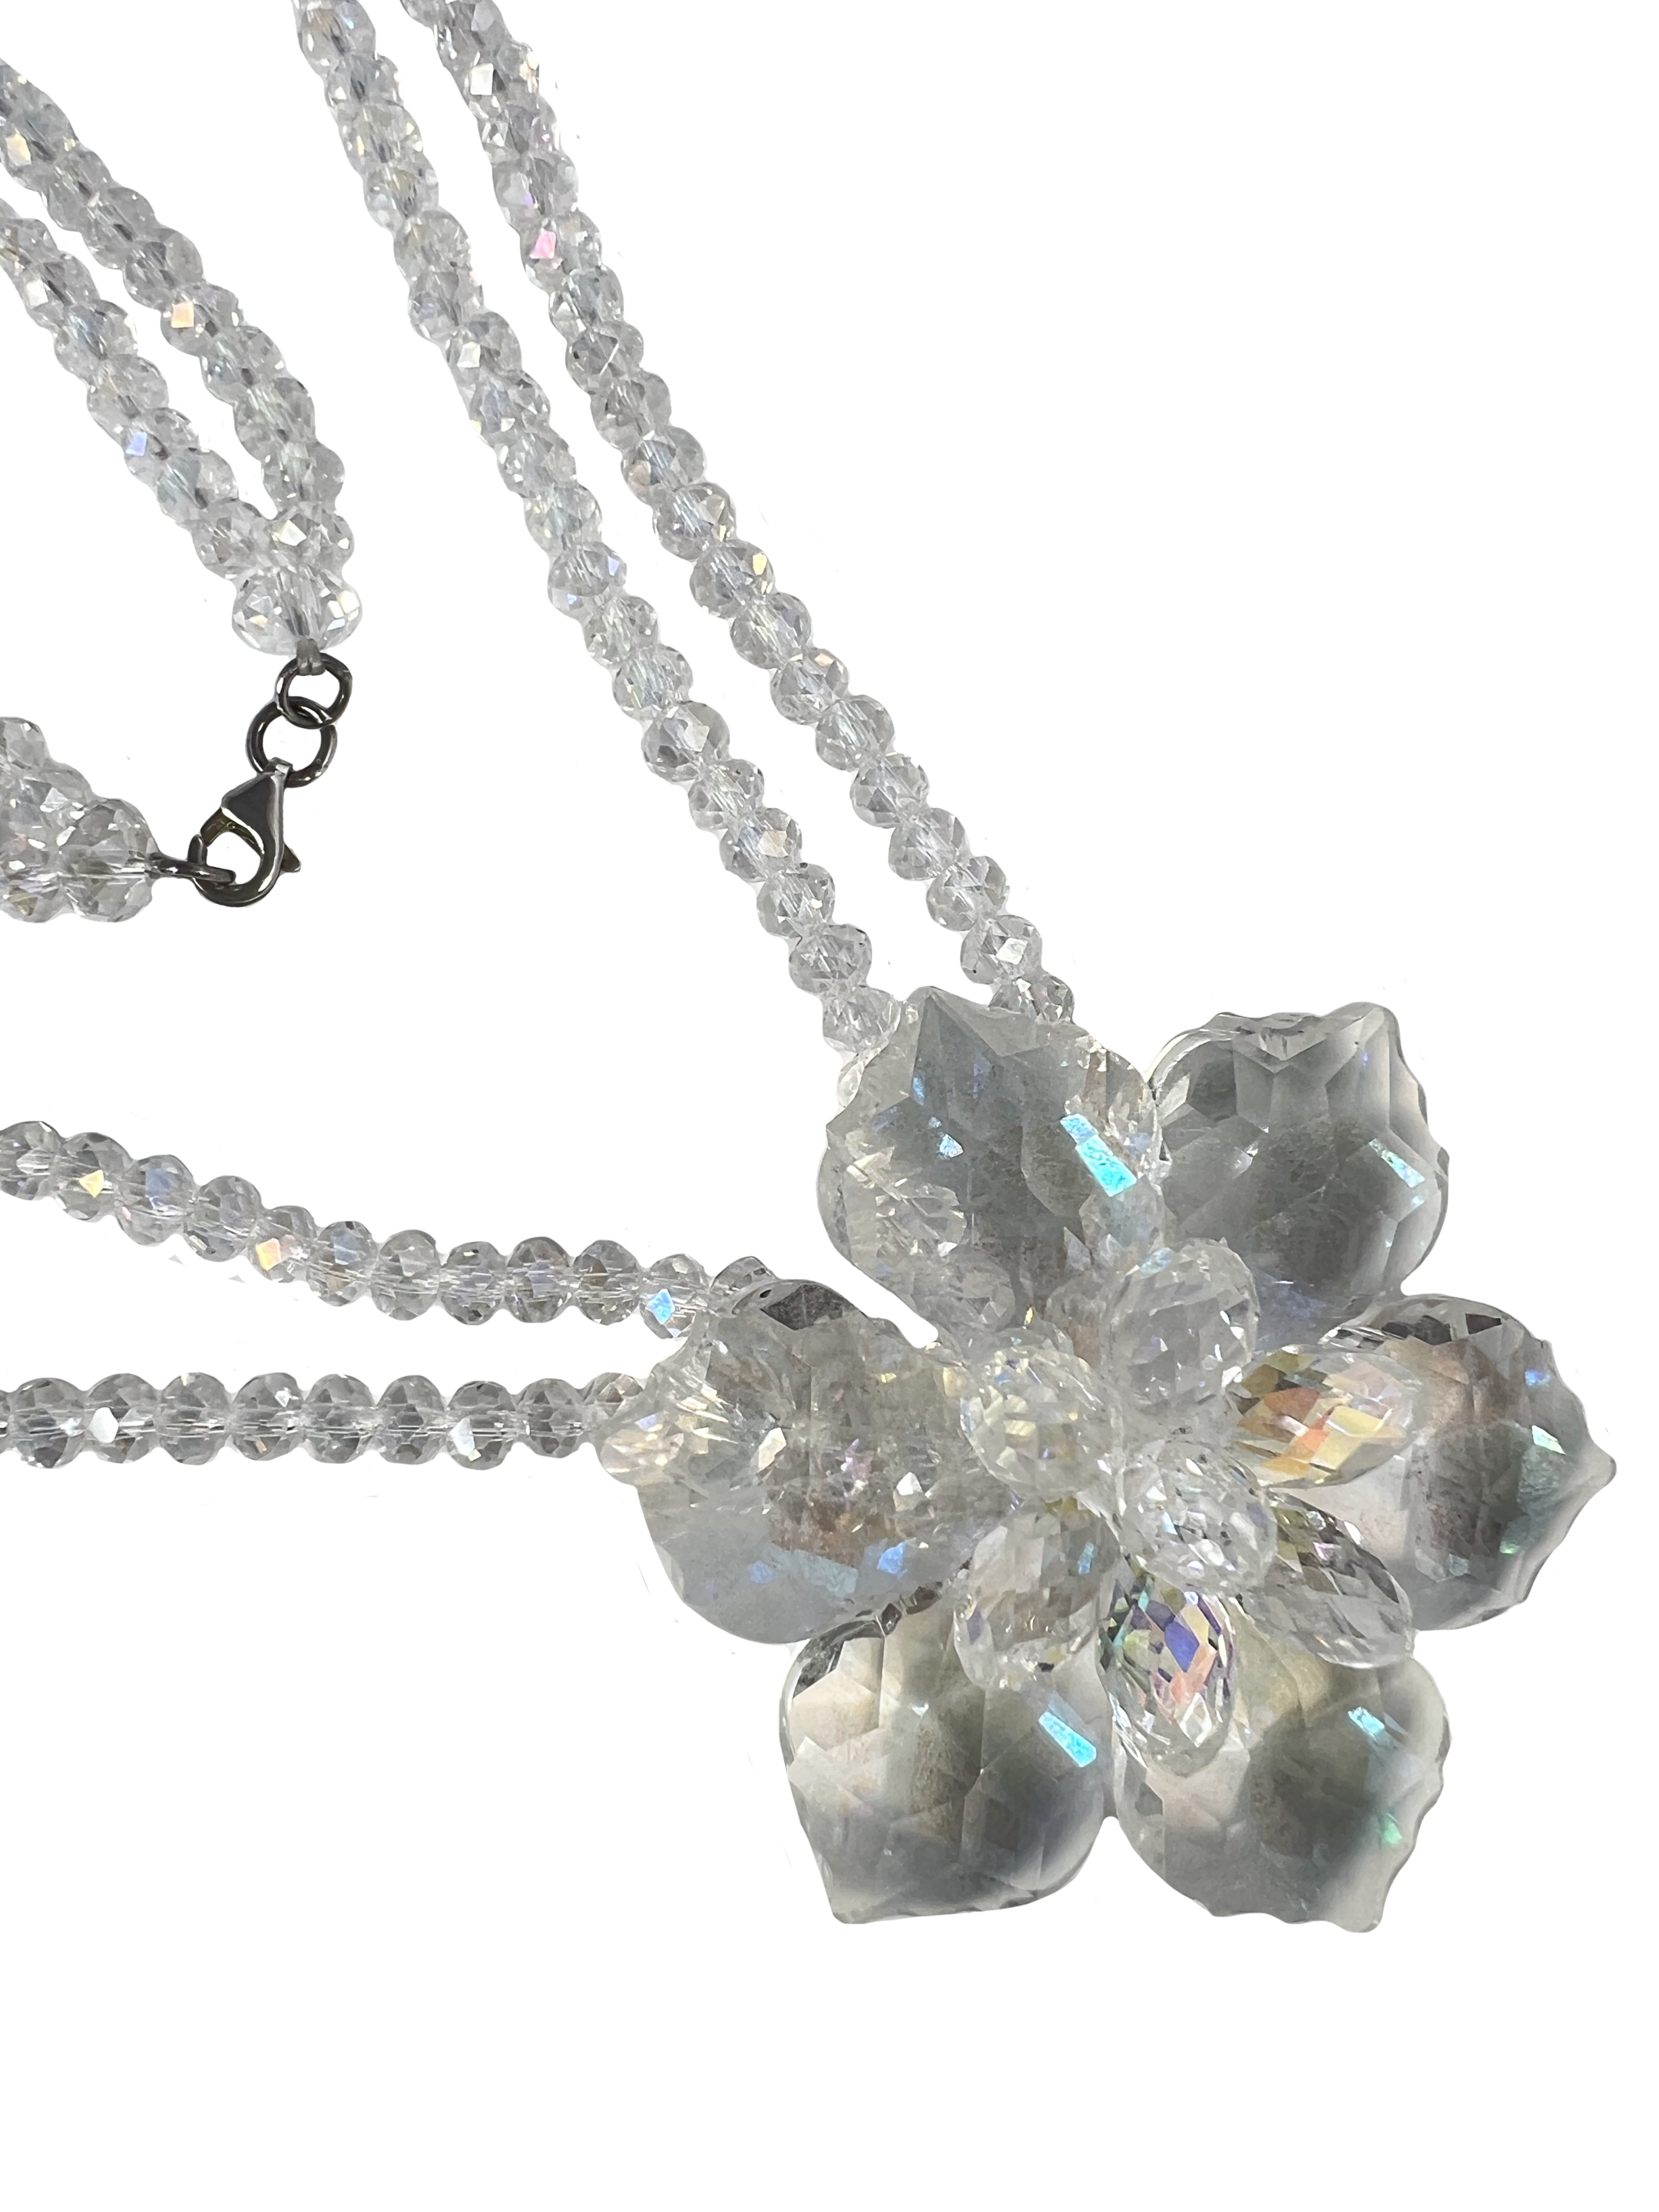 Silver necklace made of crystals with a flower